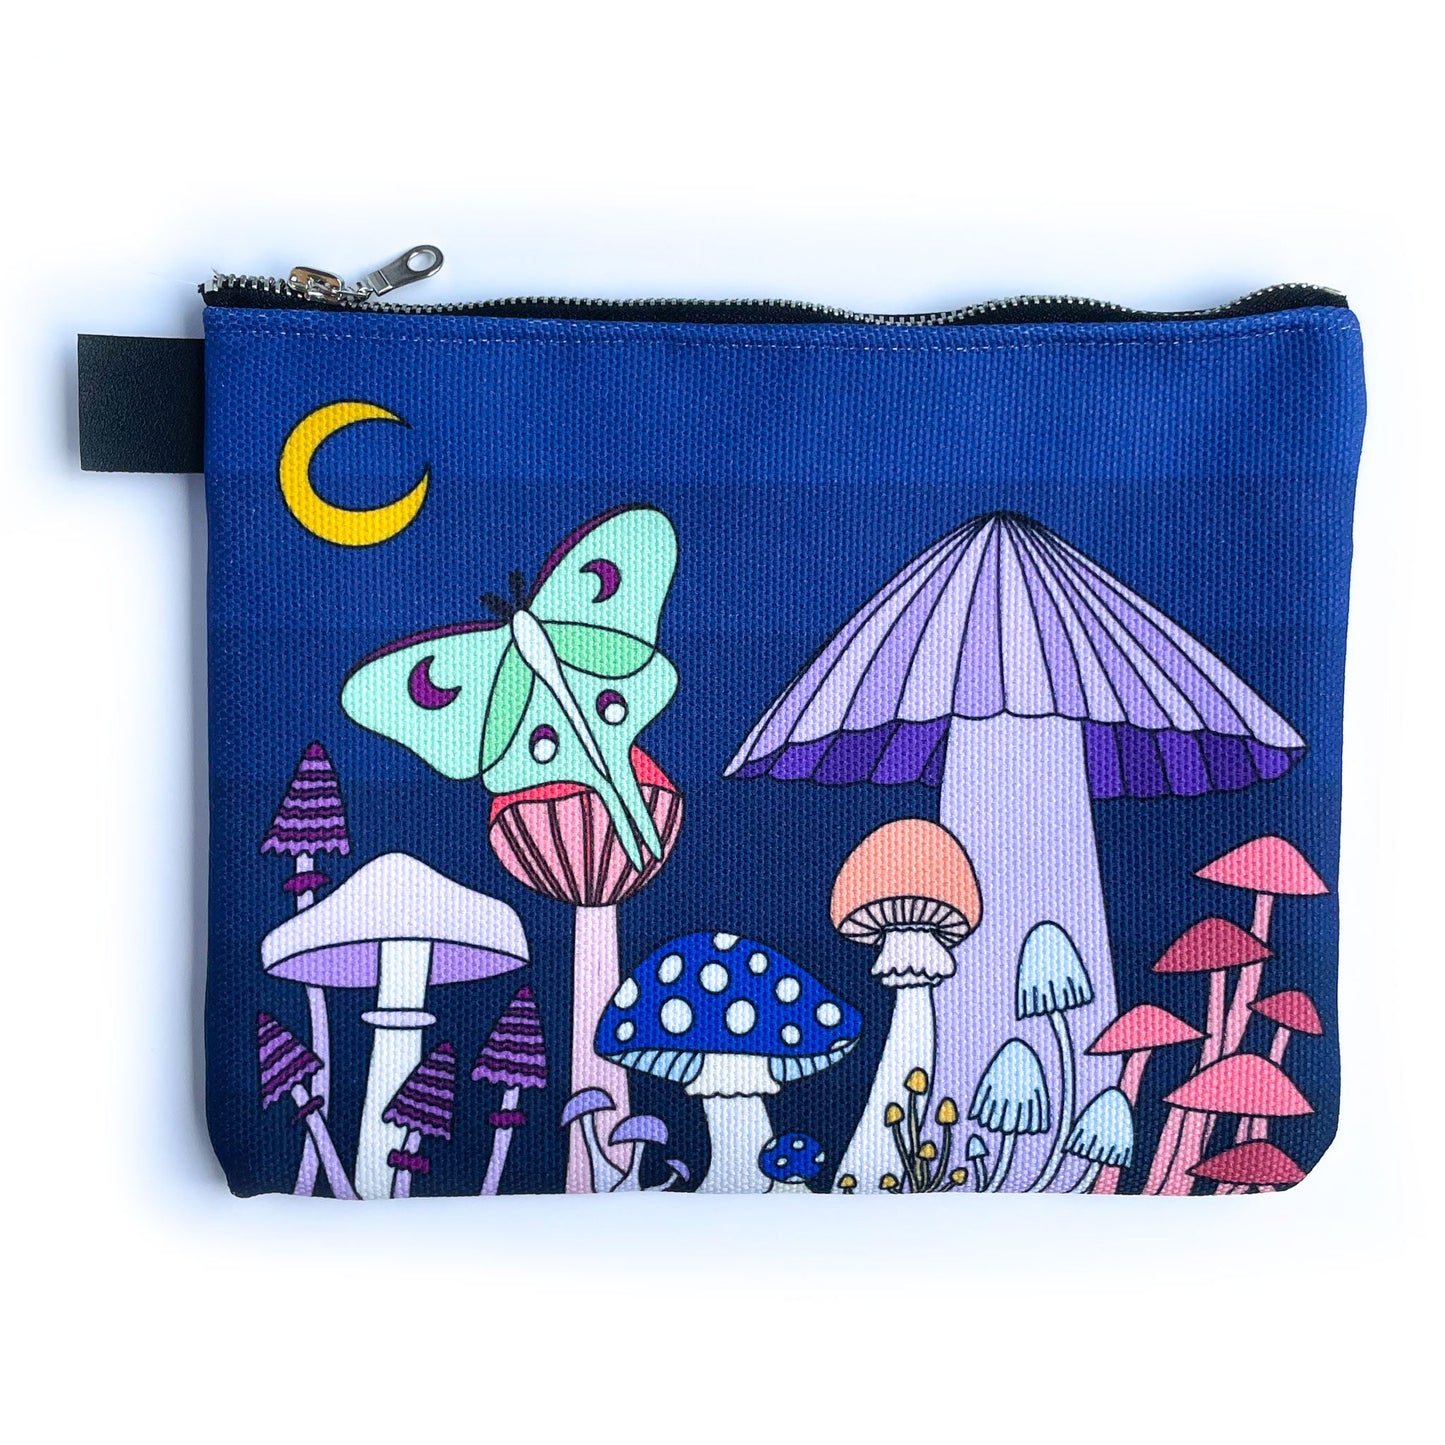 A flat zipper bag with art of pastel mushrooms and a luna moth on it. 